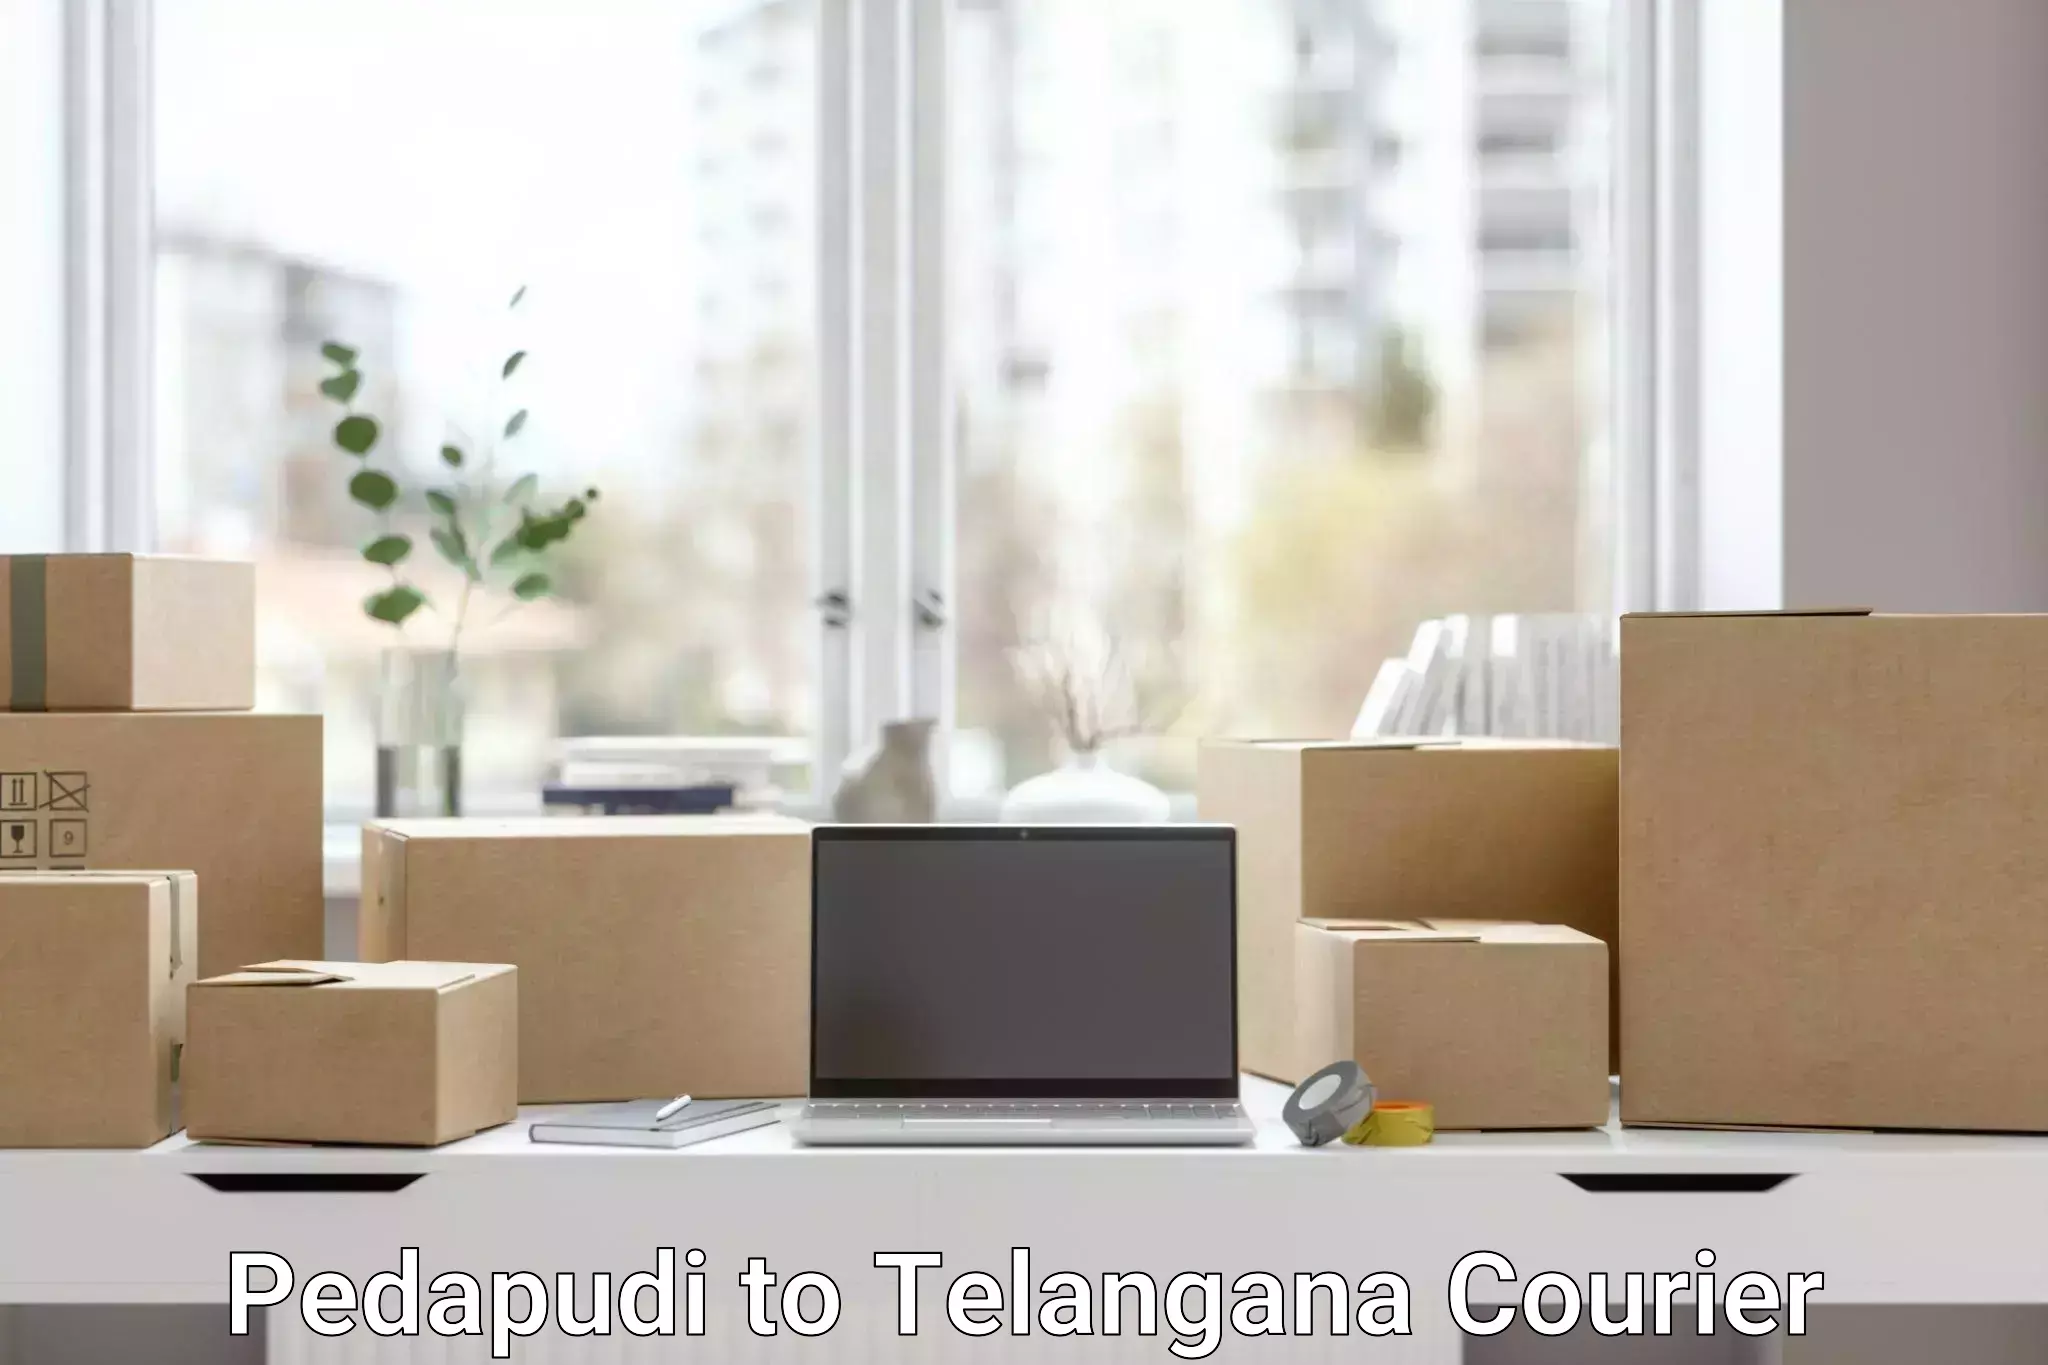 Parcel handling and care Pedapudi to Secunderabad